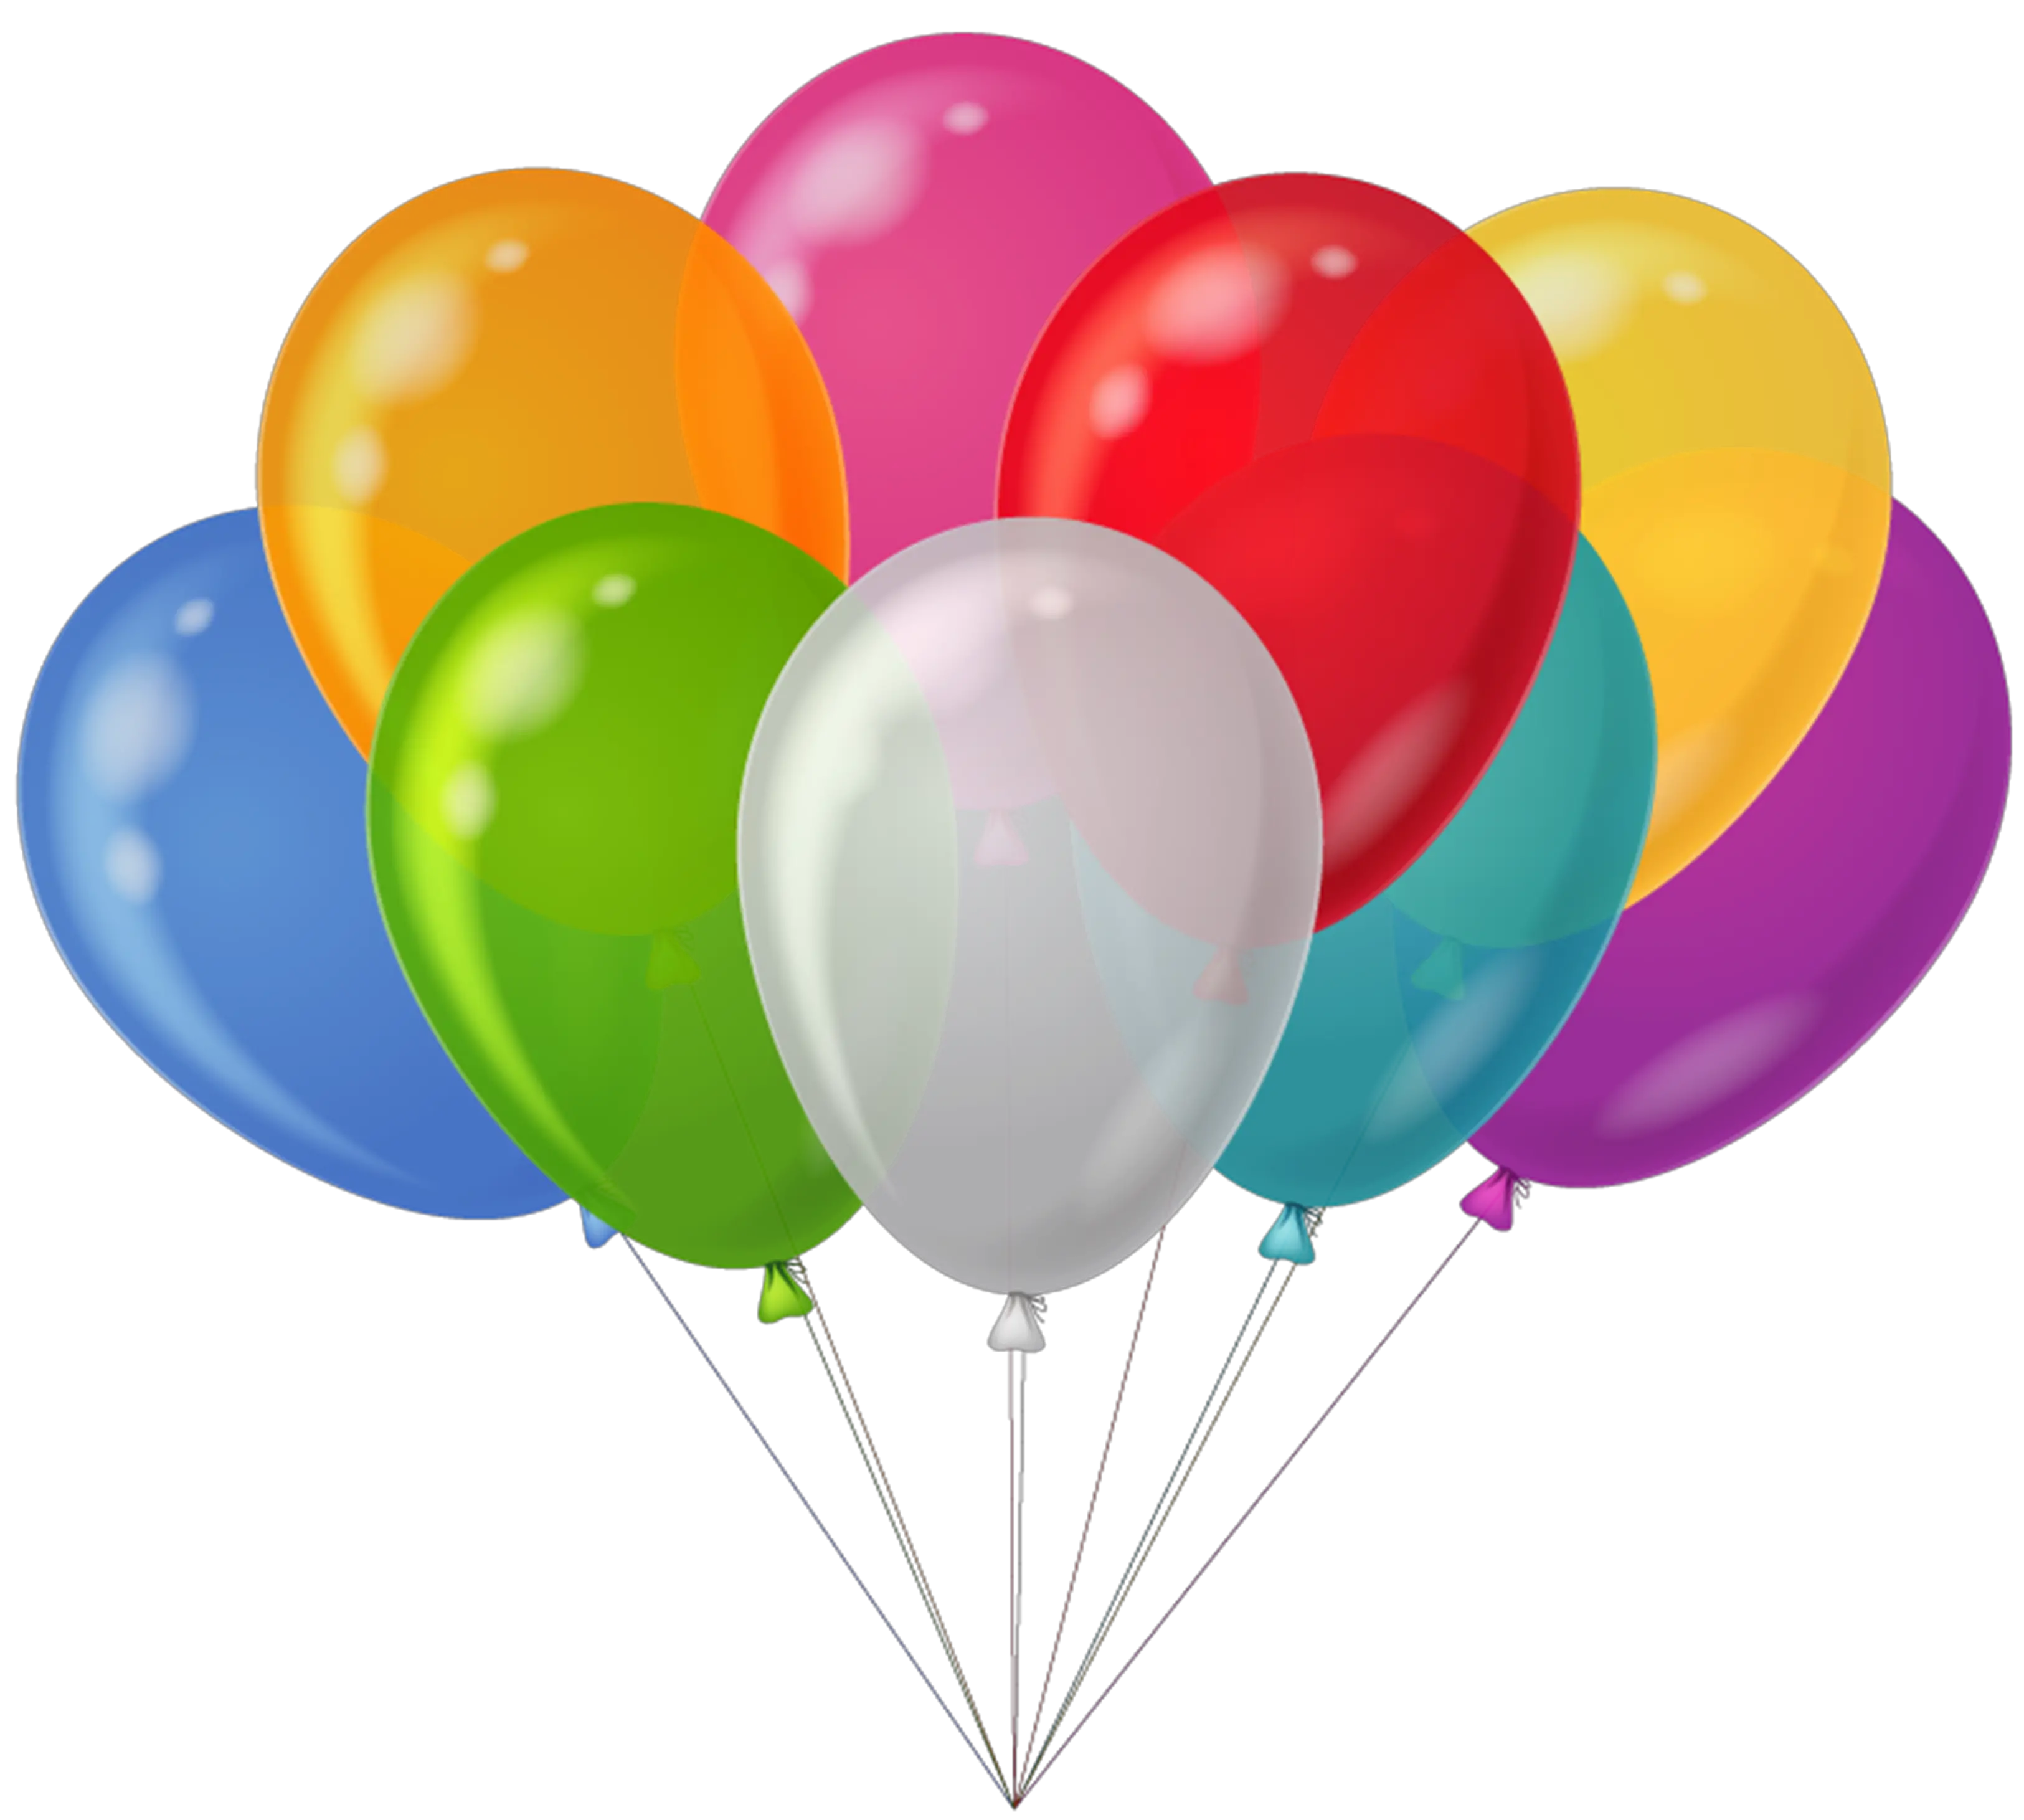 Rainbow Style Balloons Png Transparent Background Balloon Clipart Up Balloons Png